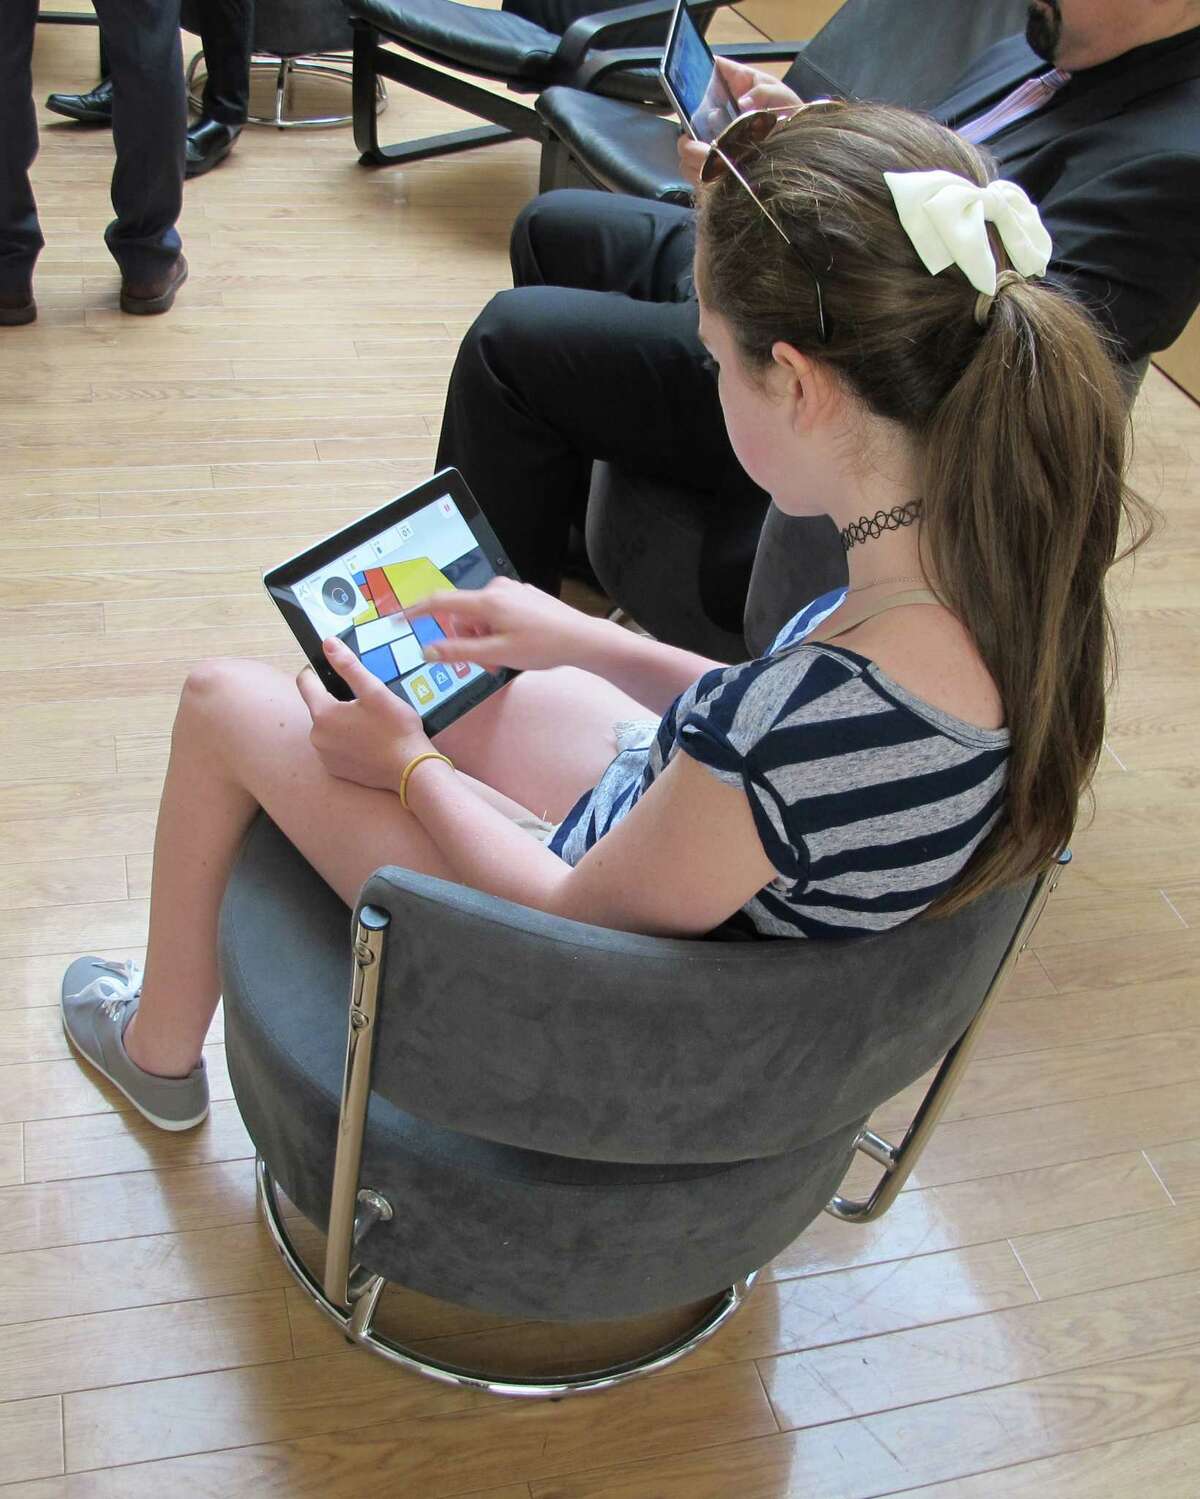 Jamie Drury, 12, plays the game "Equilibrian" at the Albright-Knox Art Gallery in Buffalo, N.Y., Thursday, June 25, 2015. The game is one of eight contained in a new app, ArtGames 2.0, that was developed by the gallery's Innovation Lab and will be available through the Apple App Store and Google Play Store beginning Saturday. (AP Photo/Carolyn Thompson) ORG XMIT: NYR103